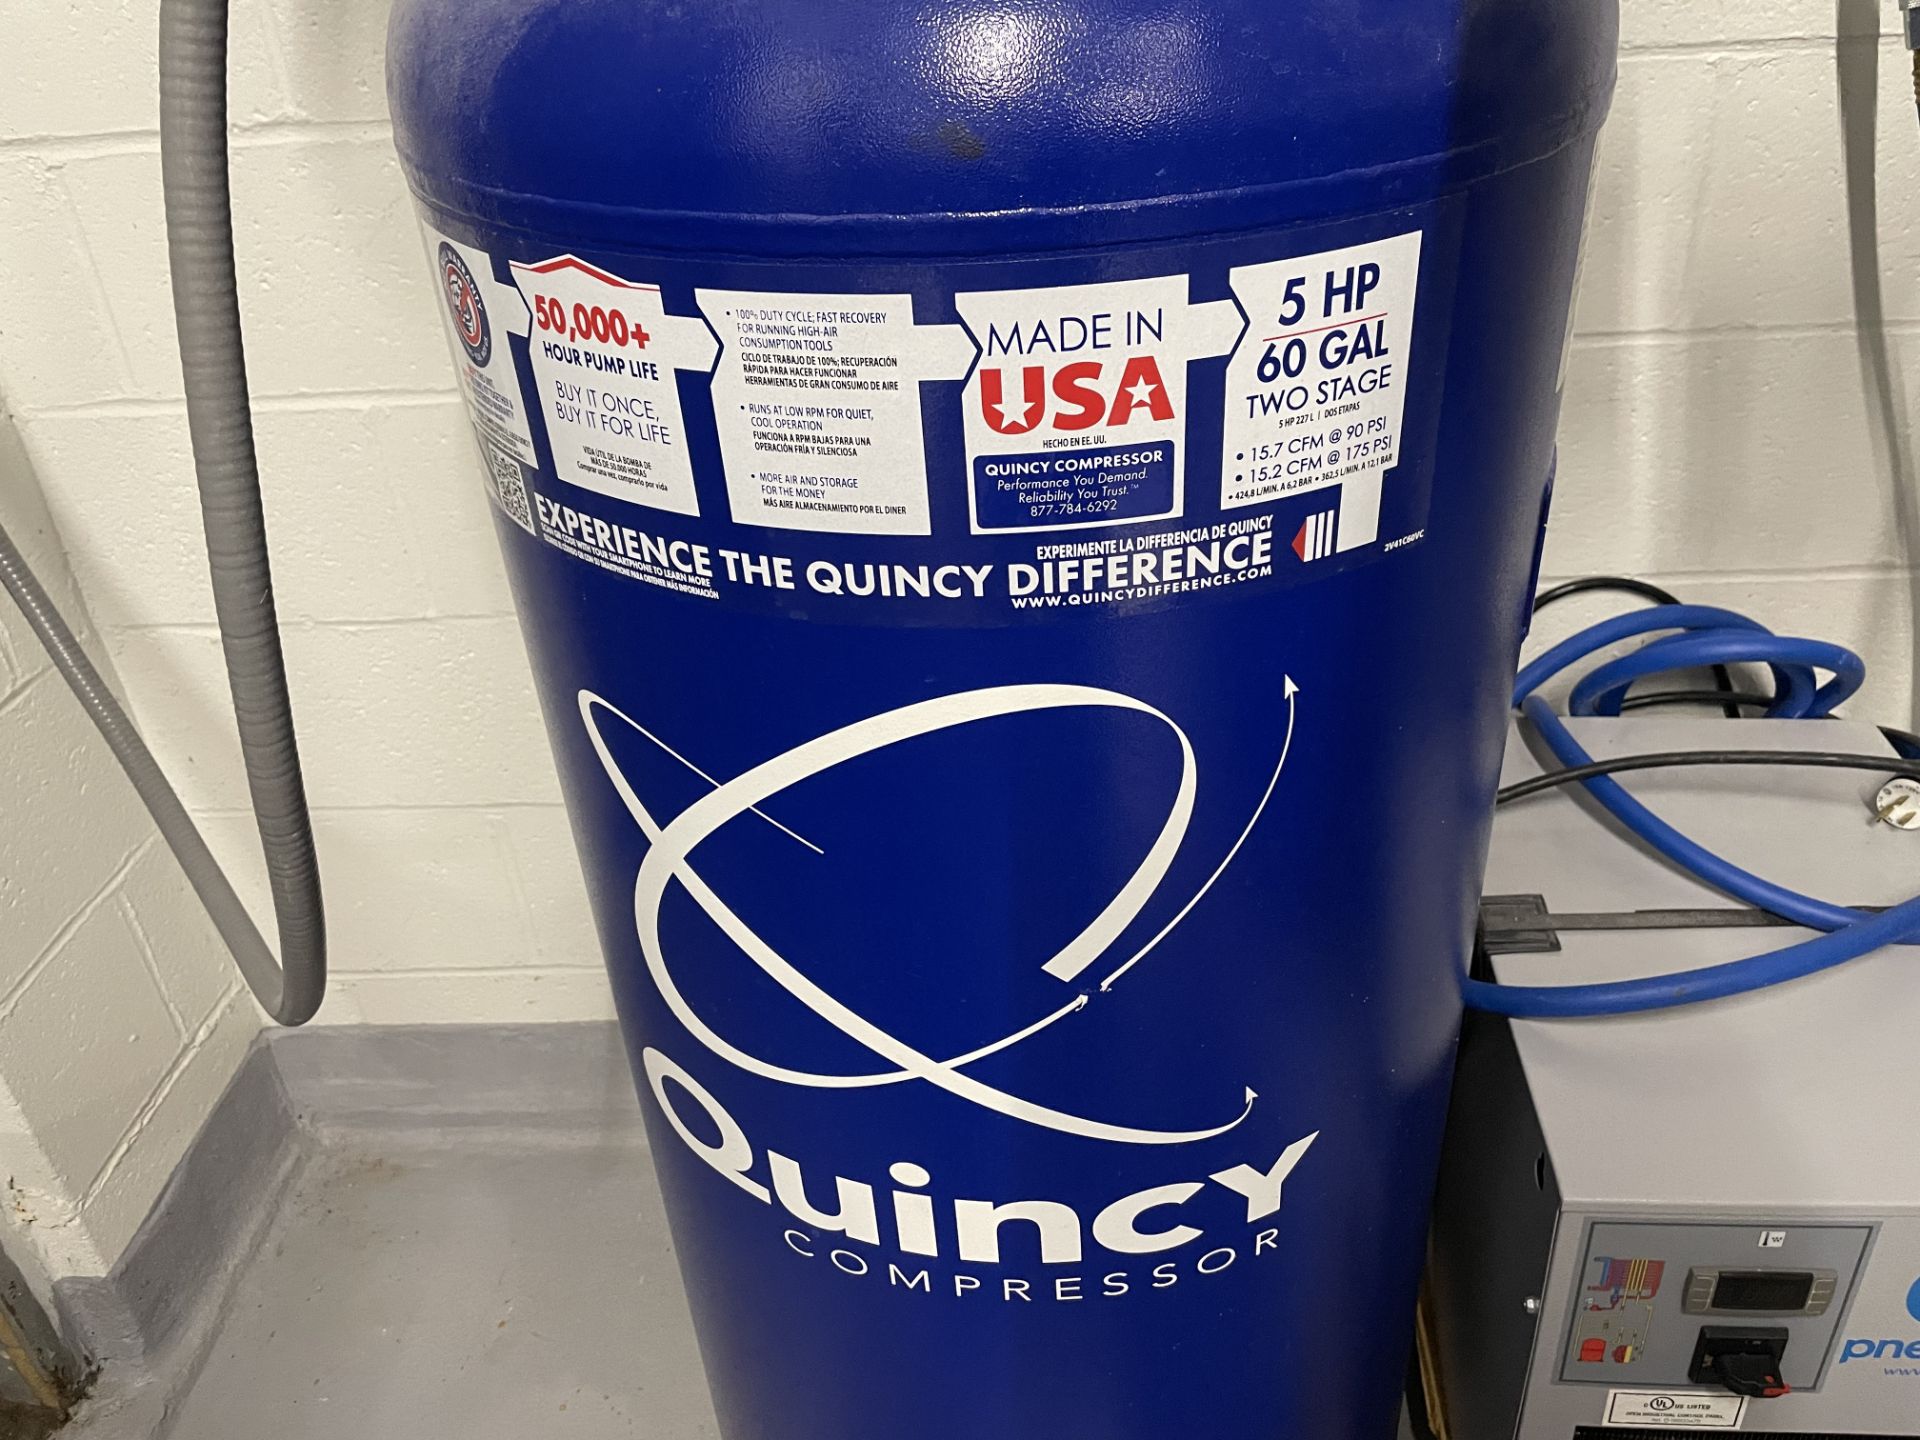 Quincy 5 HP Upright Air Compressor, Single Phase 60 Gallon Tank w/Pneumatic Dryer - Image 2 of 3